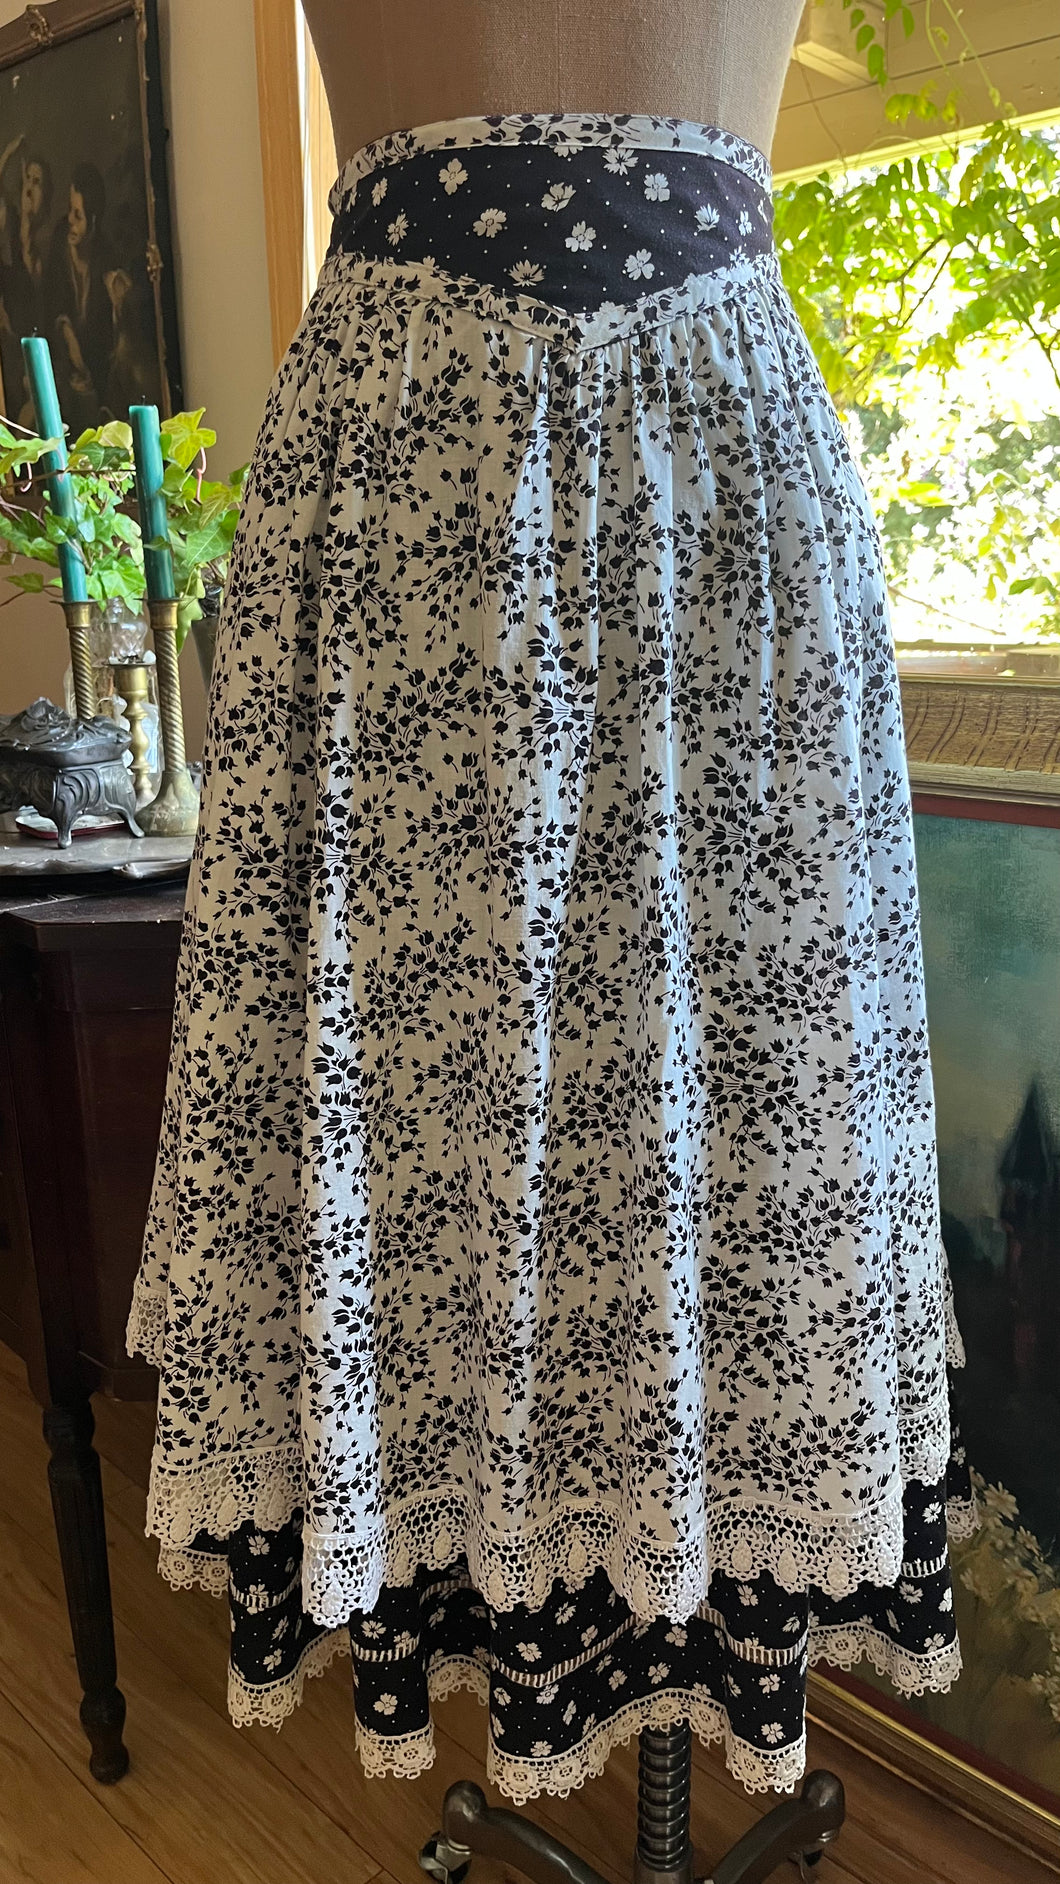 Unusual 1980’s Vintage Black and White Calico Double Layer Yoked Skirt by Jessica McClintock